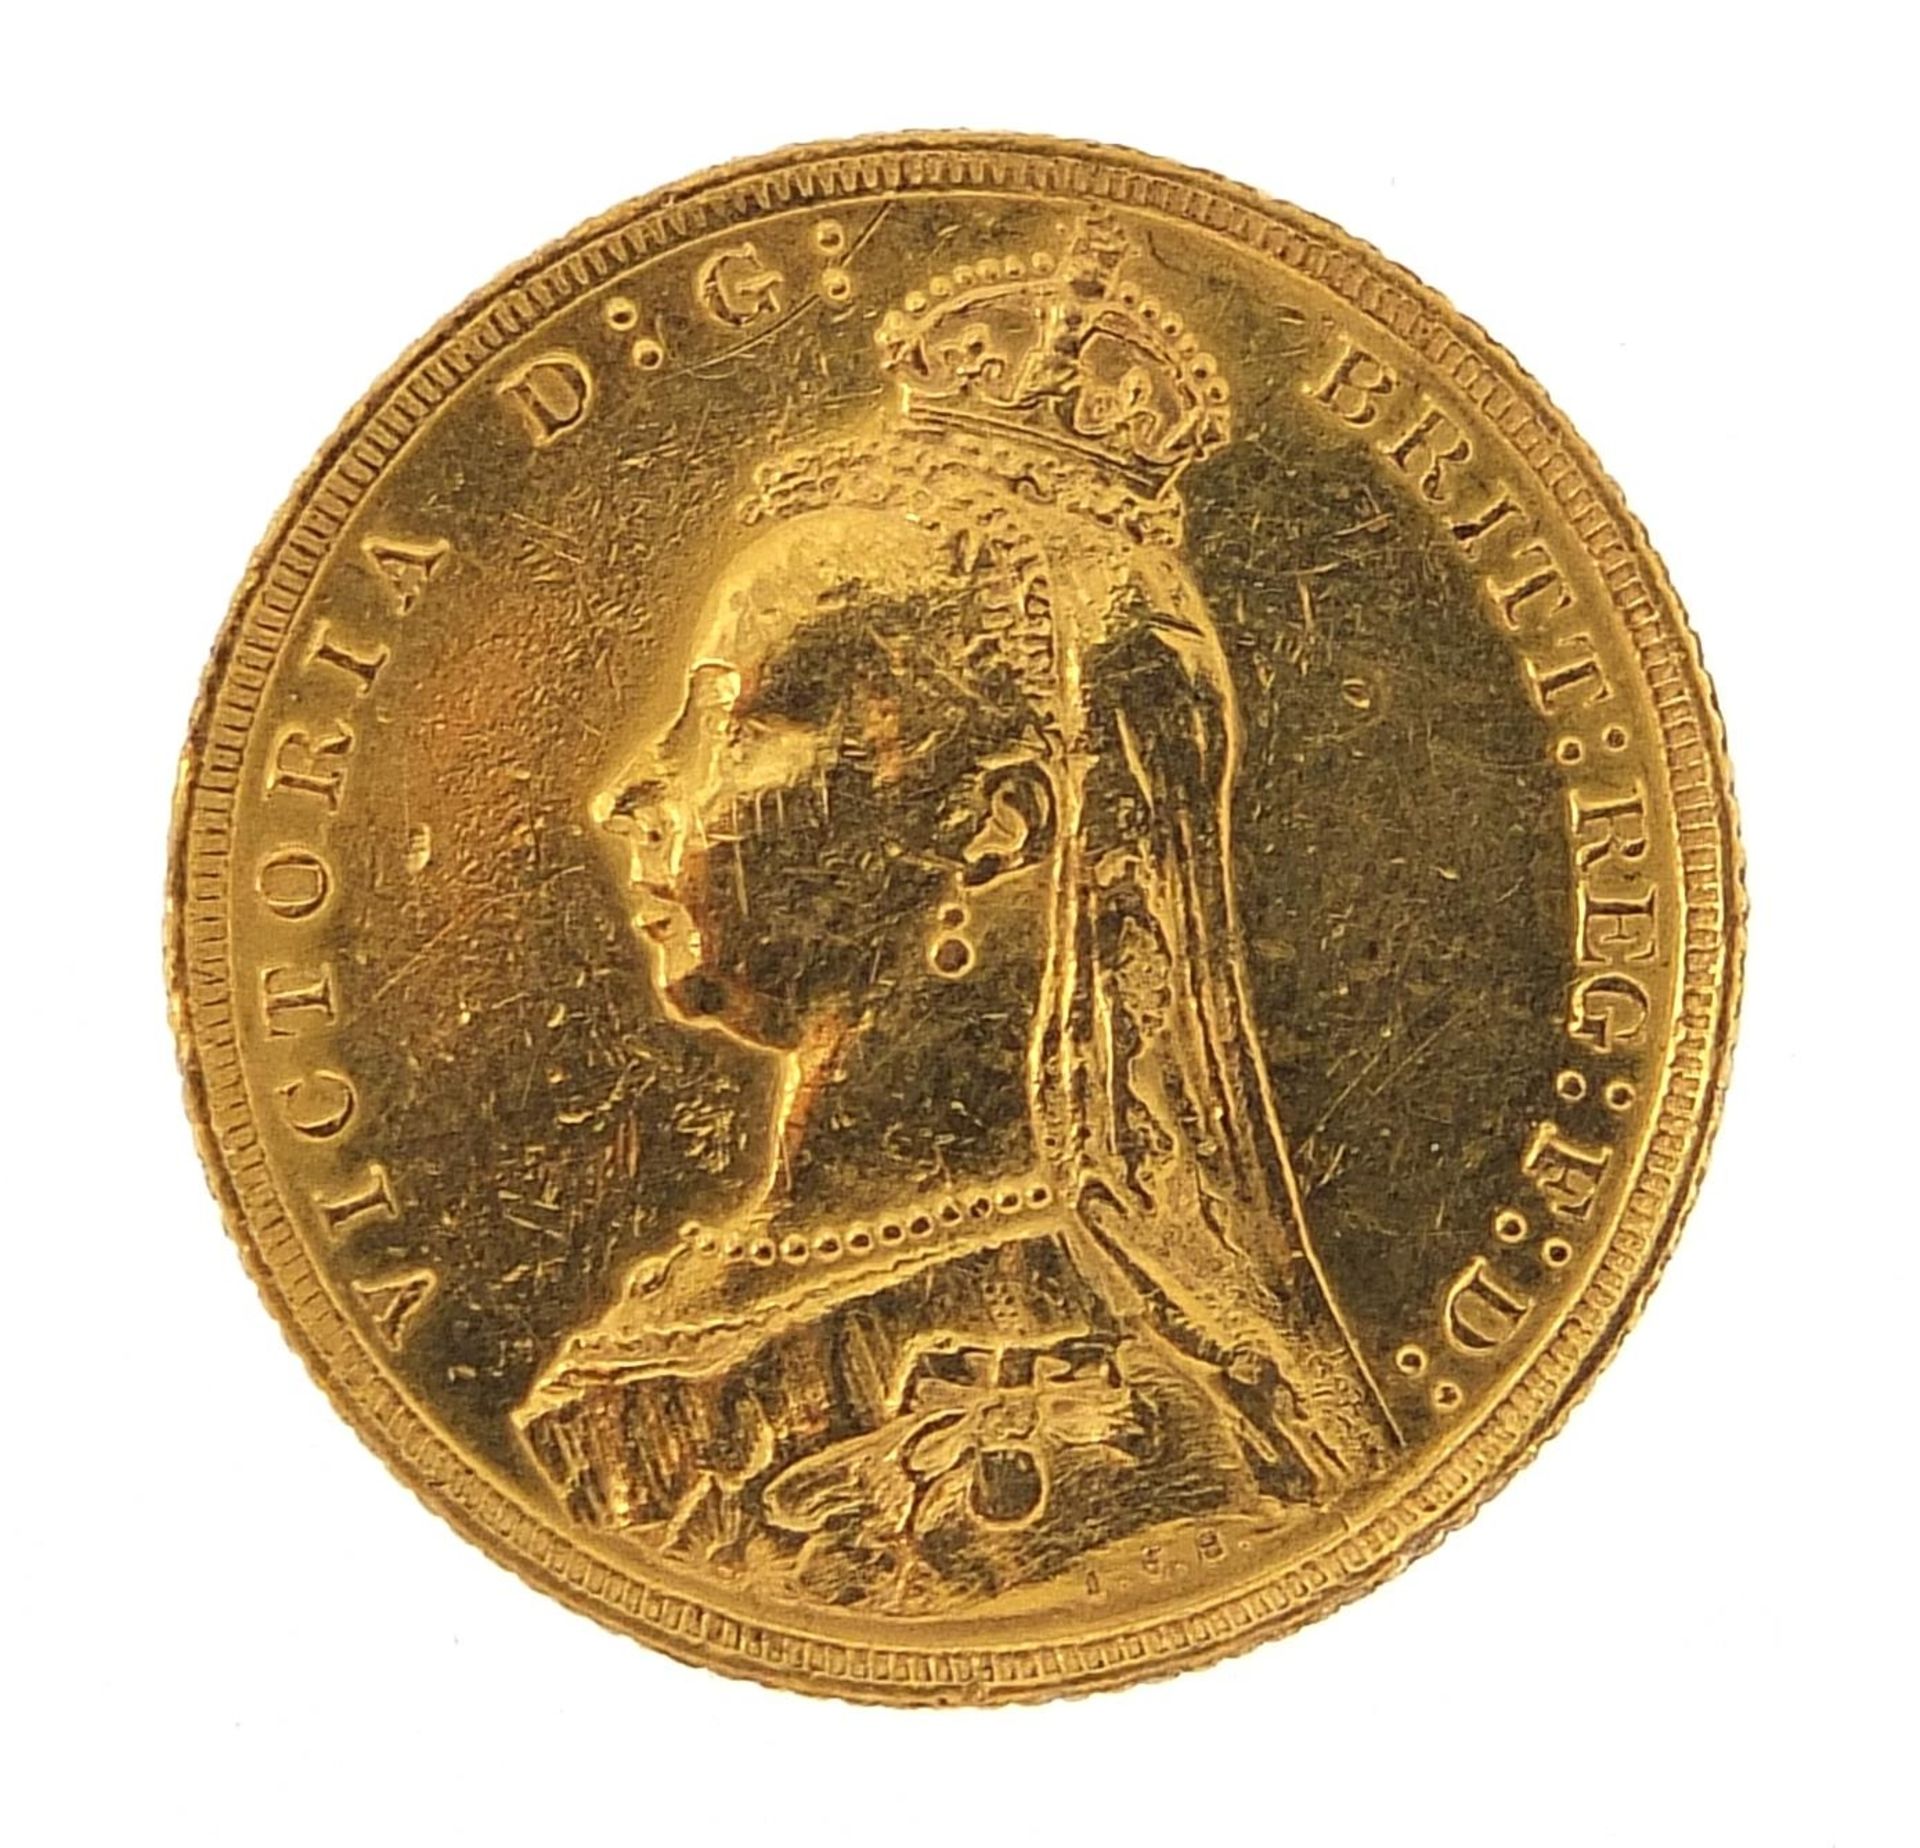 Queen Victoria Jubilee Head 1891 gold sovereign, Melbourne mint - this lot is sold without buyer's - Image 2 of 3